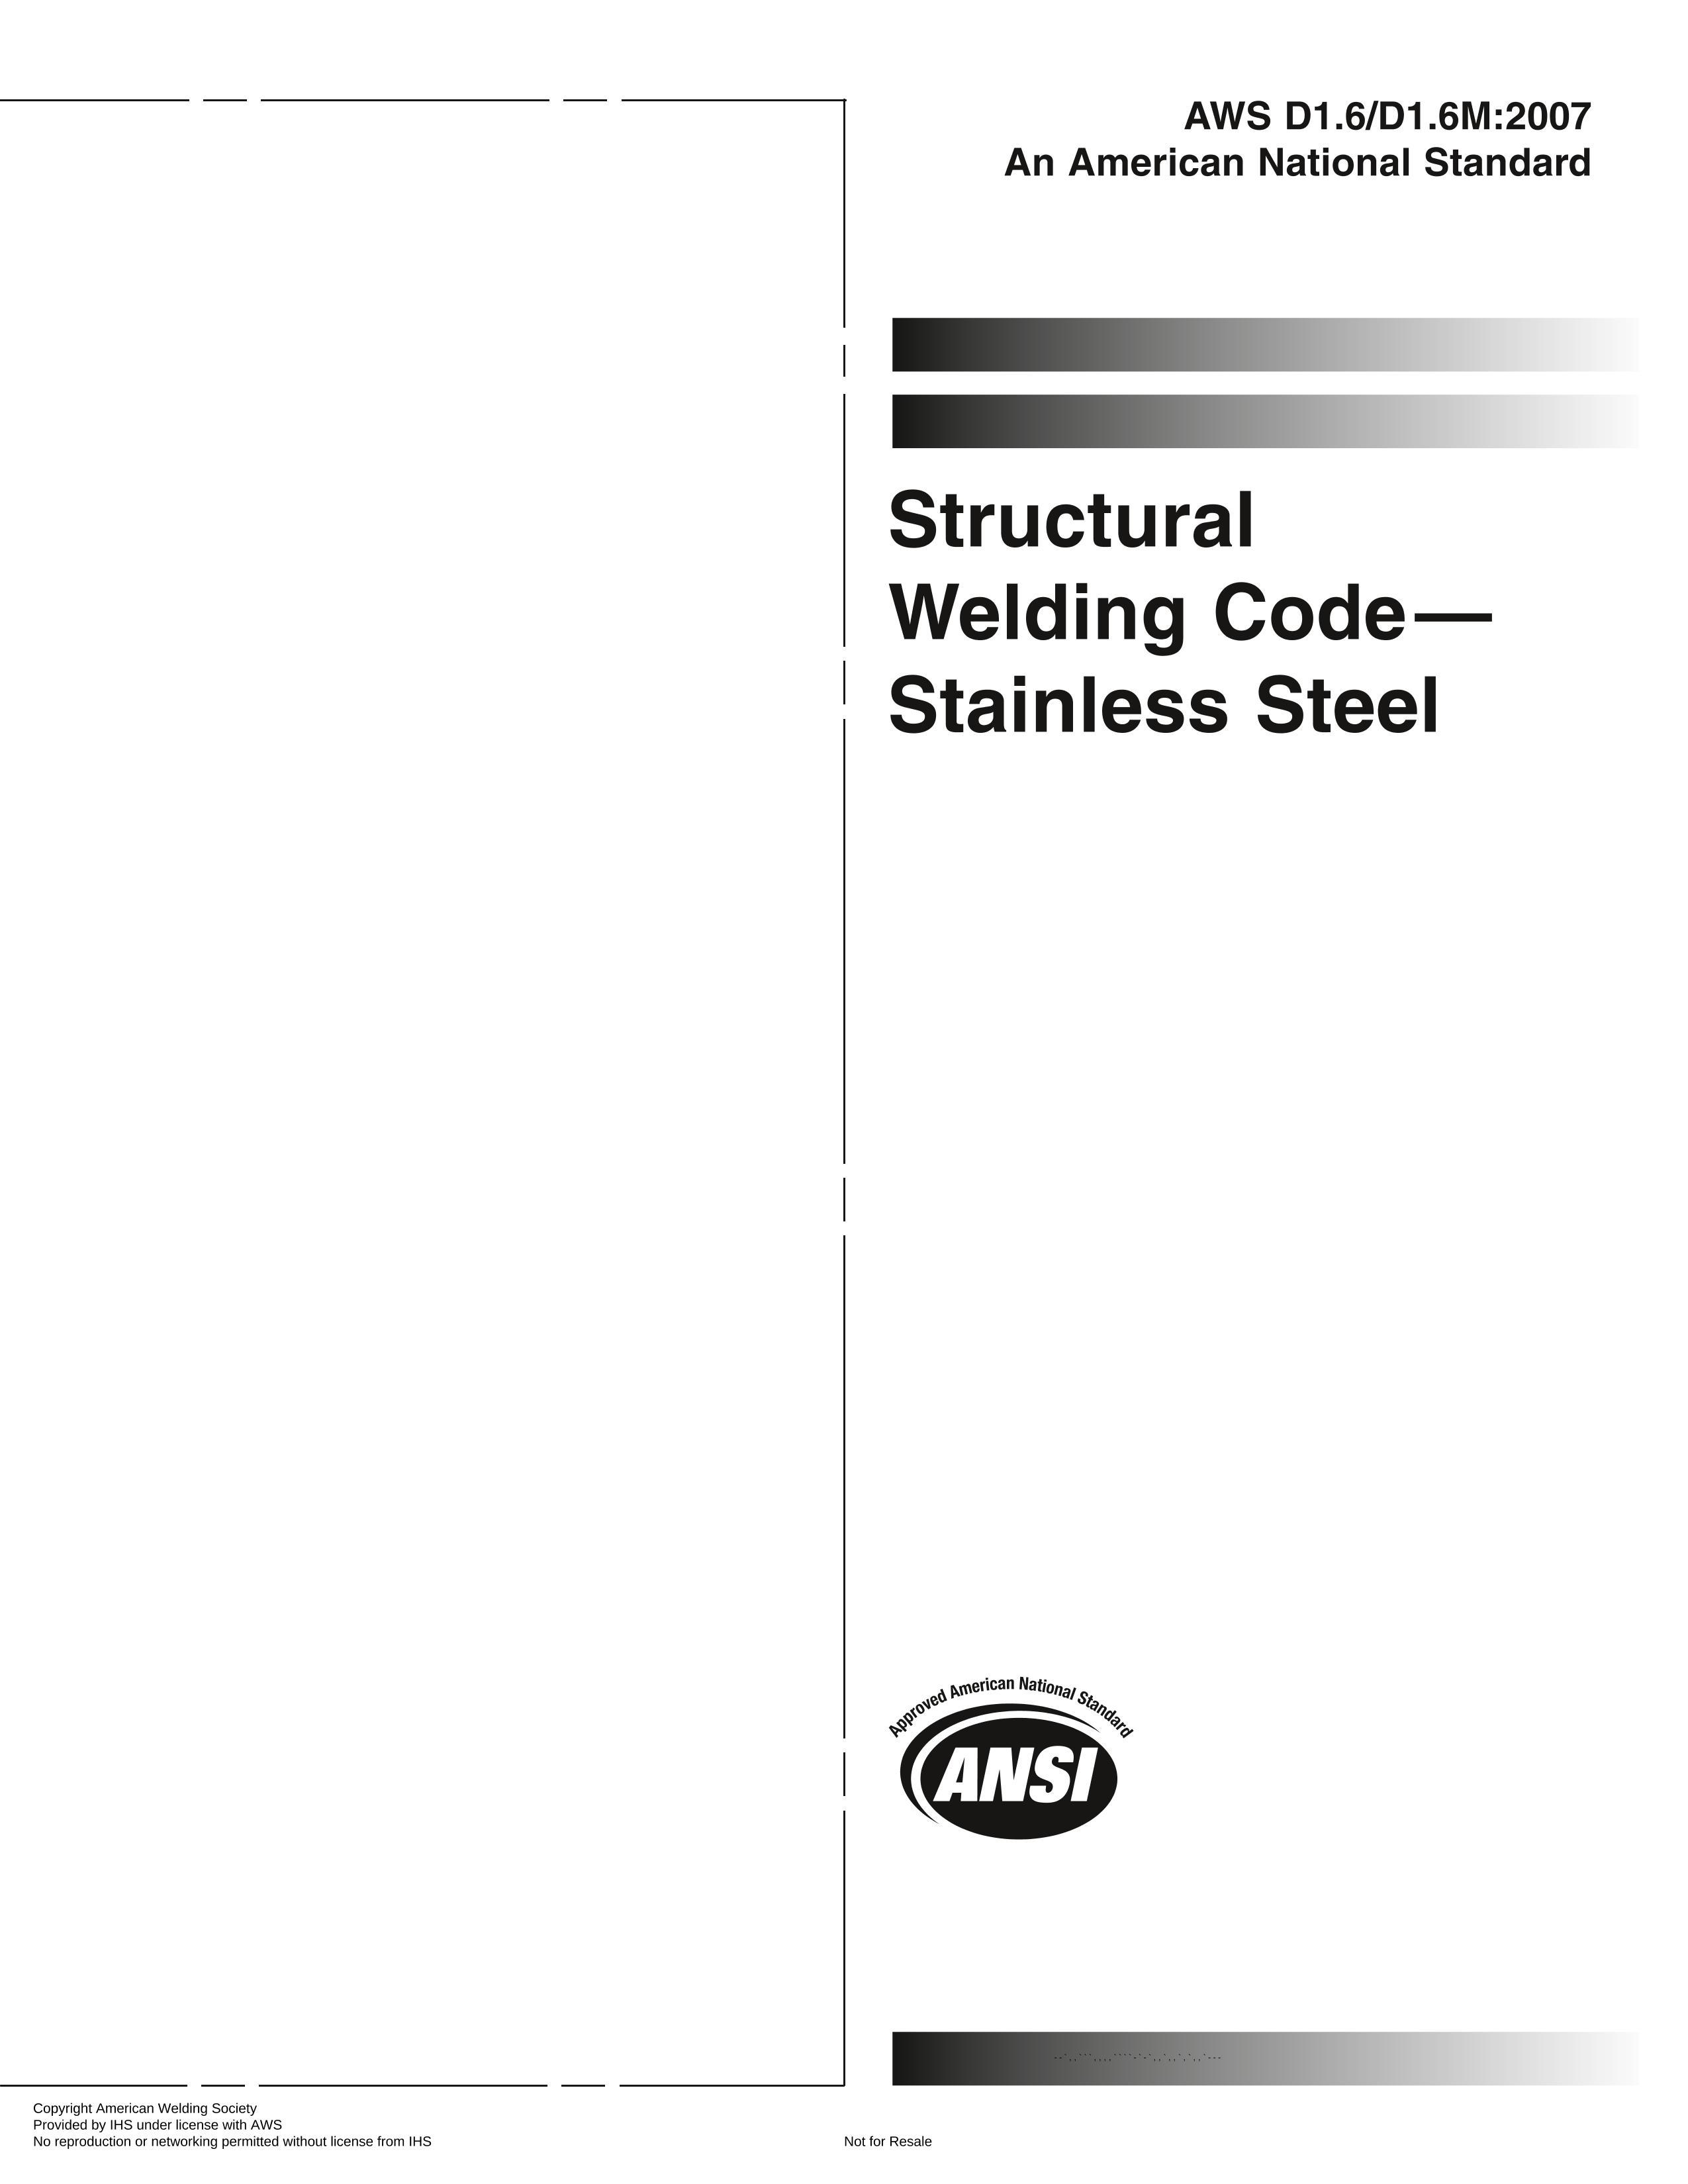 AWS D1.6_D1.6M-2007 Structural Welding CodeStainless Steel(ֺӹ淶).pdf1ҳ